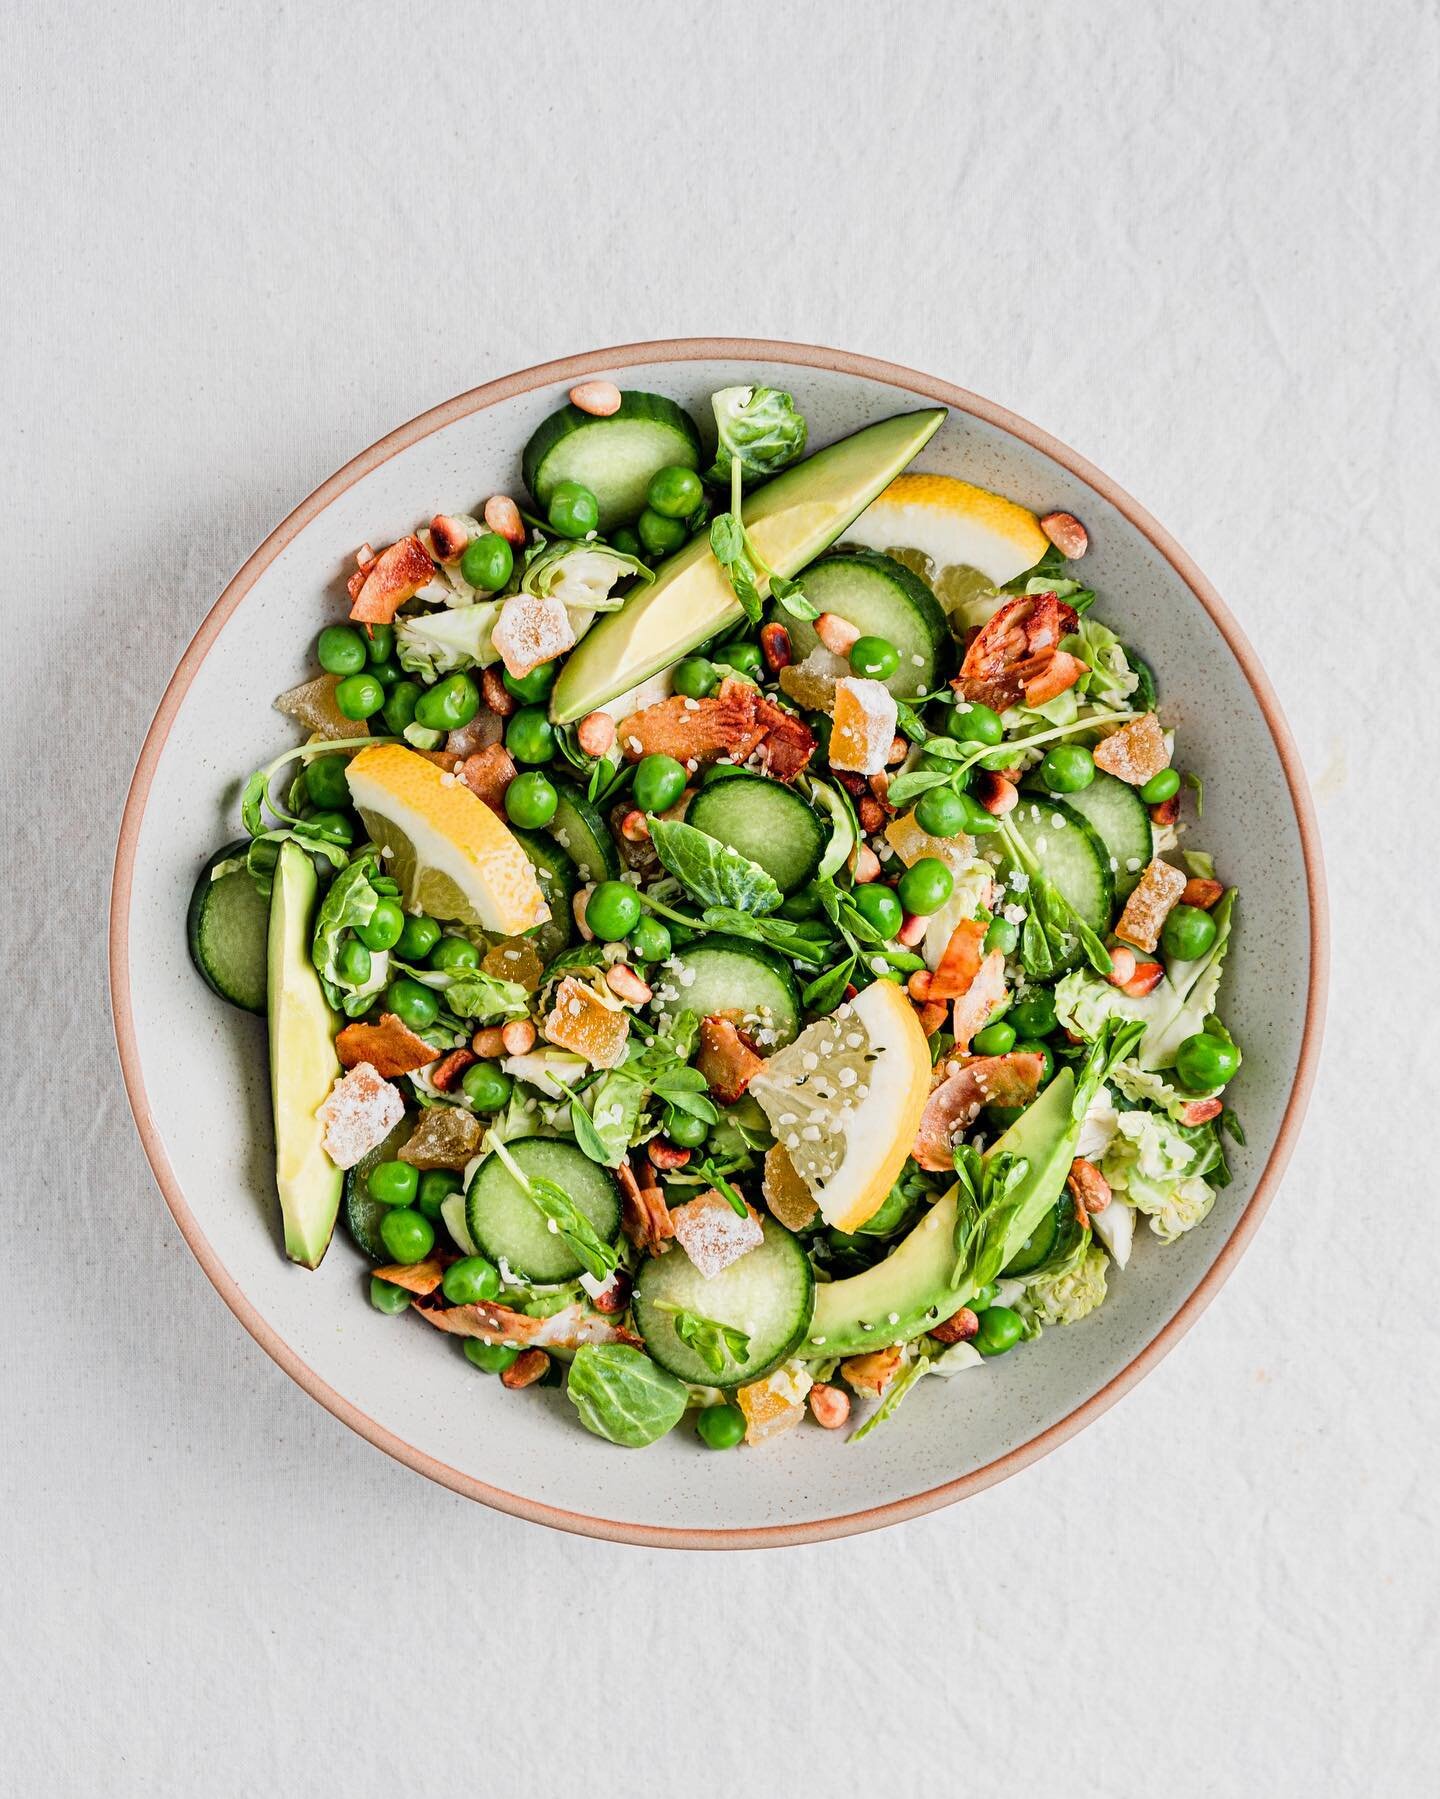 What&rsquo;s greater than the sum of its parts? This shaved Brussels sprouts salad with fresh peas, crisp cucumber, creamy avocado, salty coconut bacon toasted pine nuts, all dressed in a ginger lemon herb vinaigrette.

Which ingredient is a nonnegot